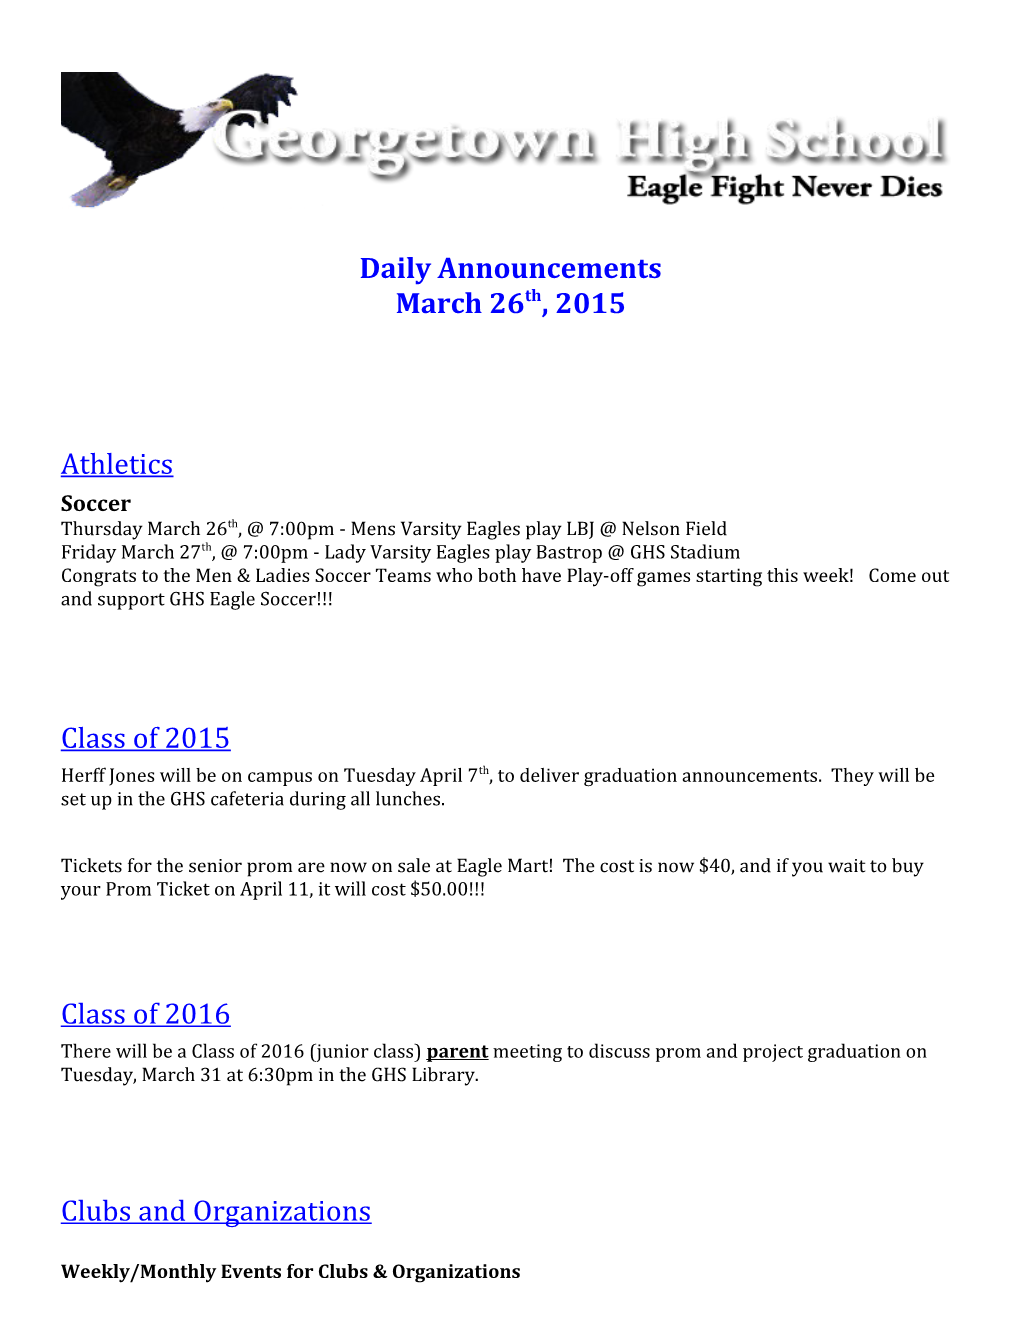 Daily Announcements s3